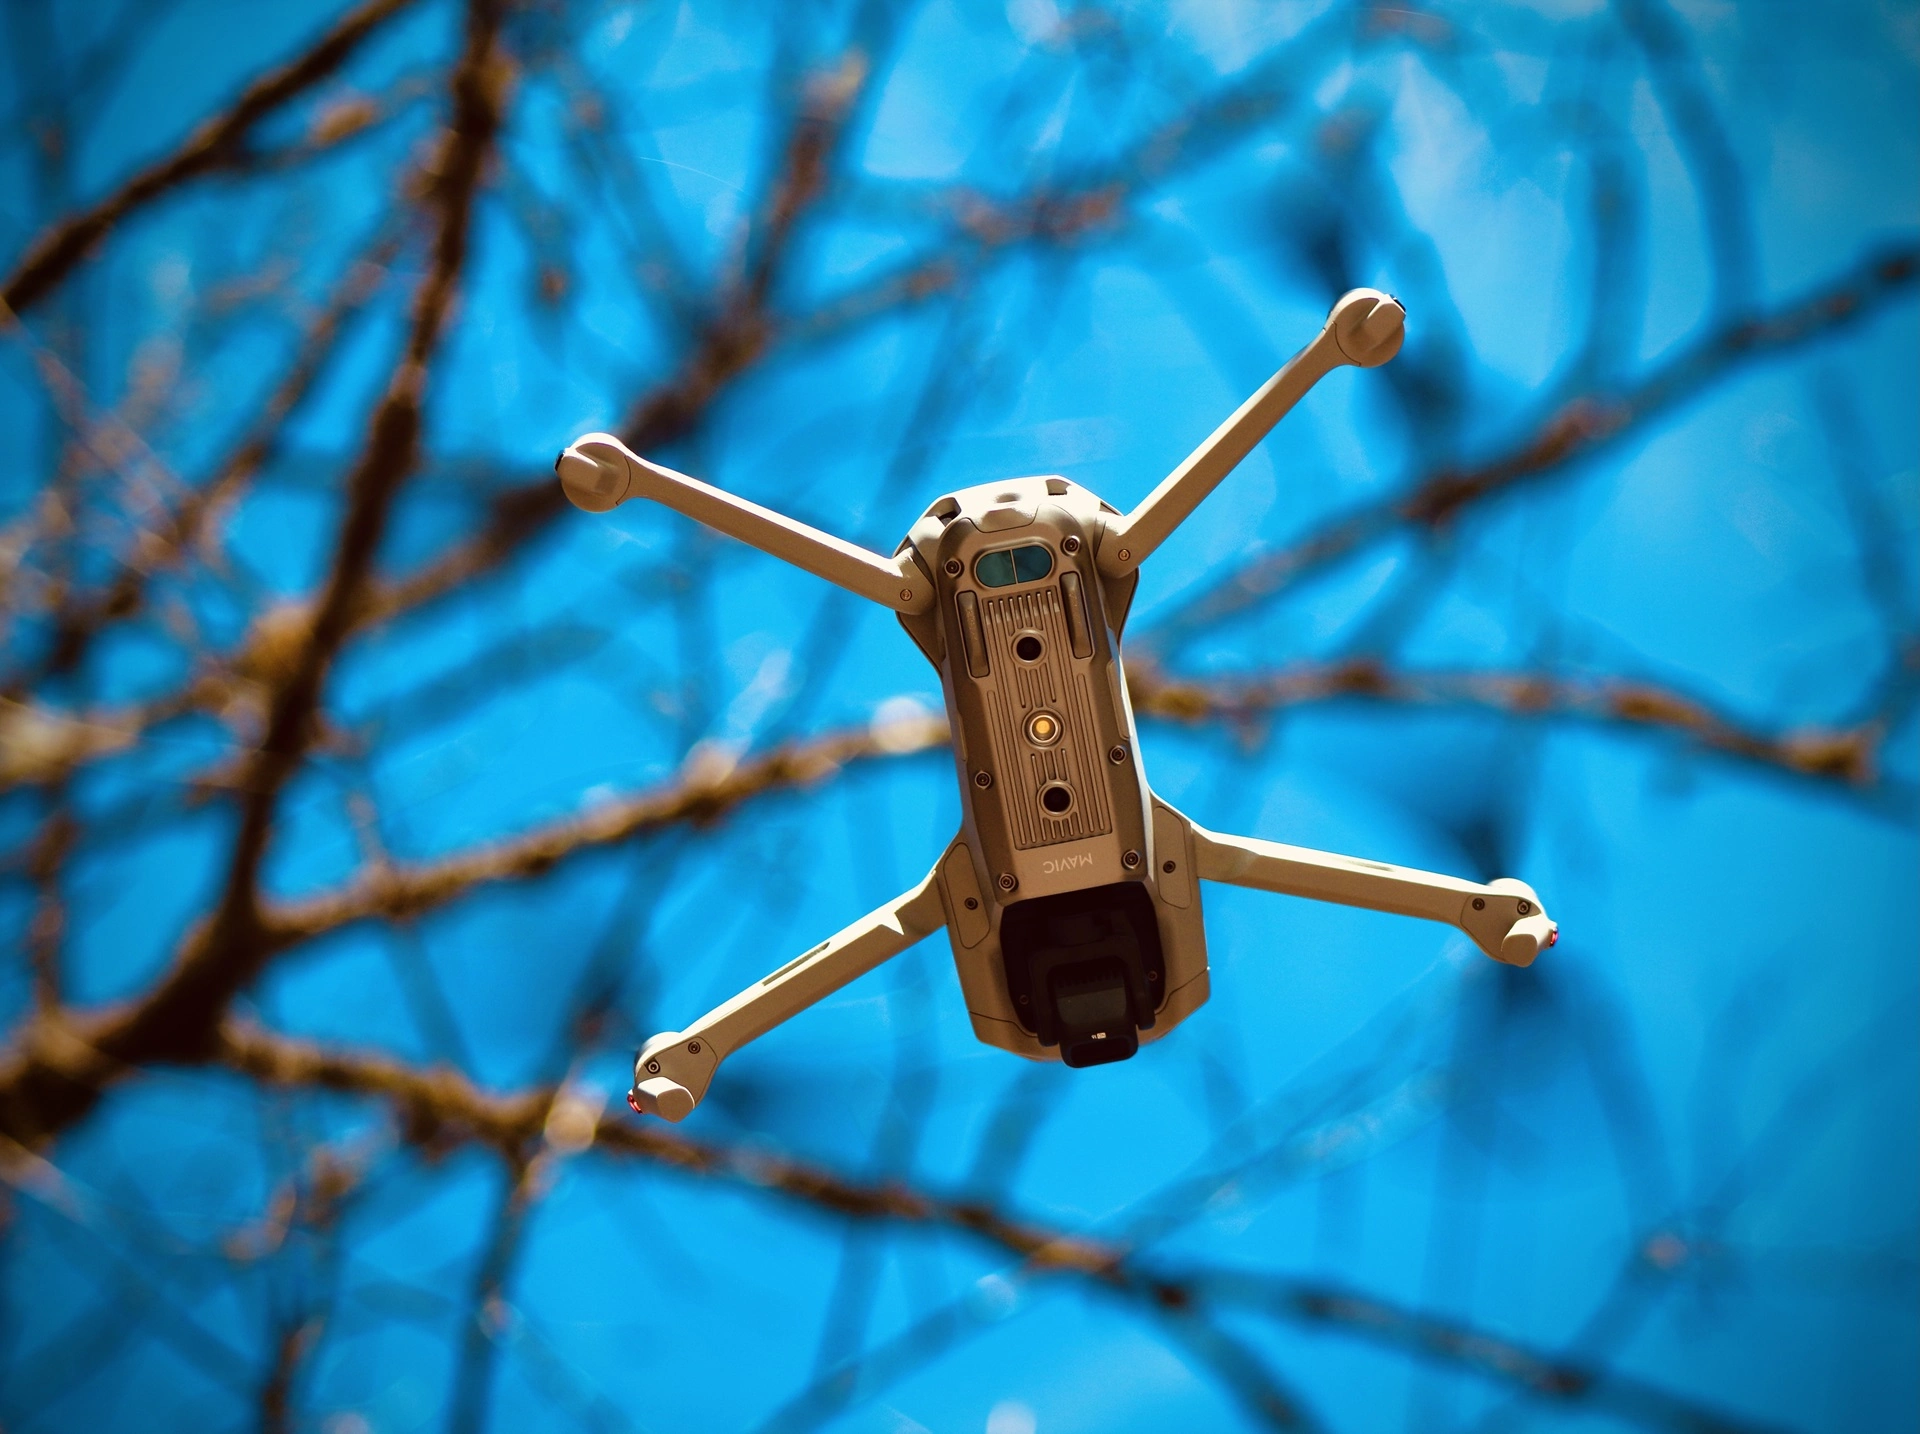 A drone conducting surveillance flies against a clear blue sky, seen from below through branches without leaves.